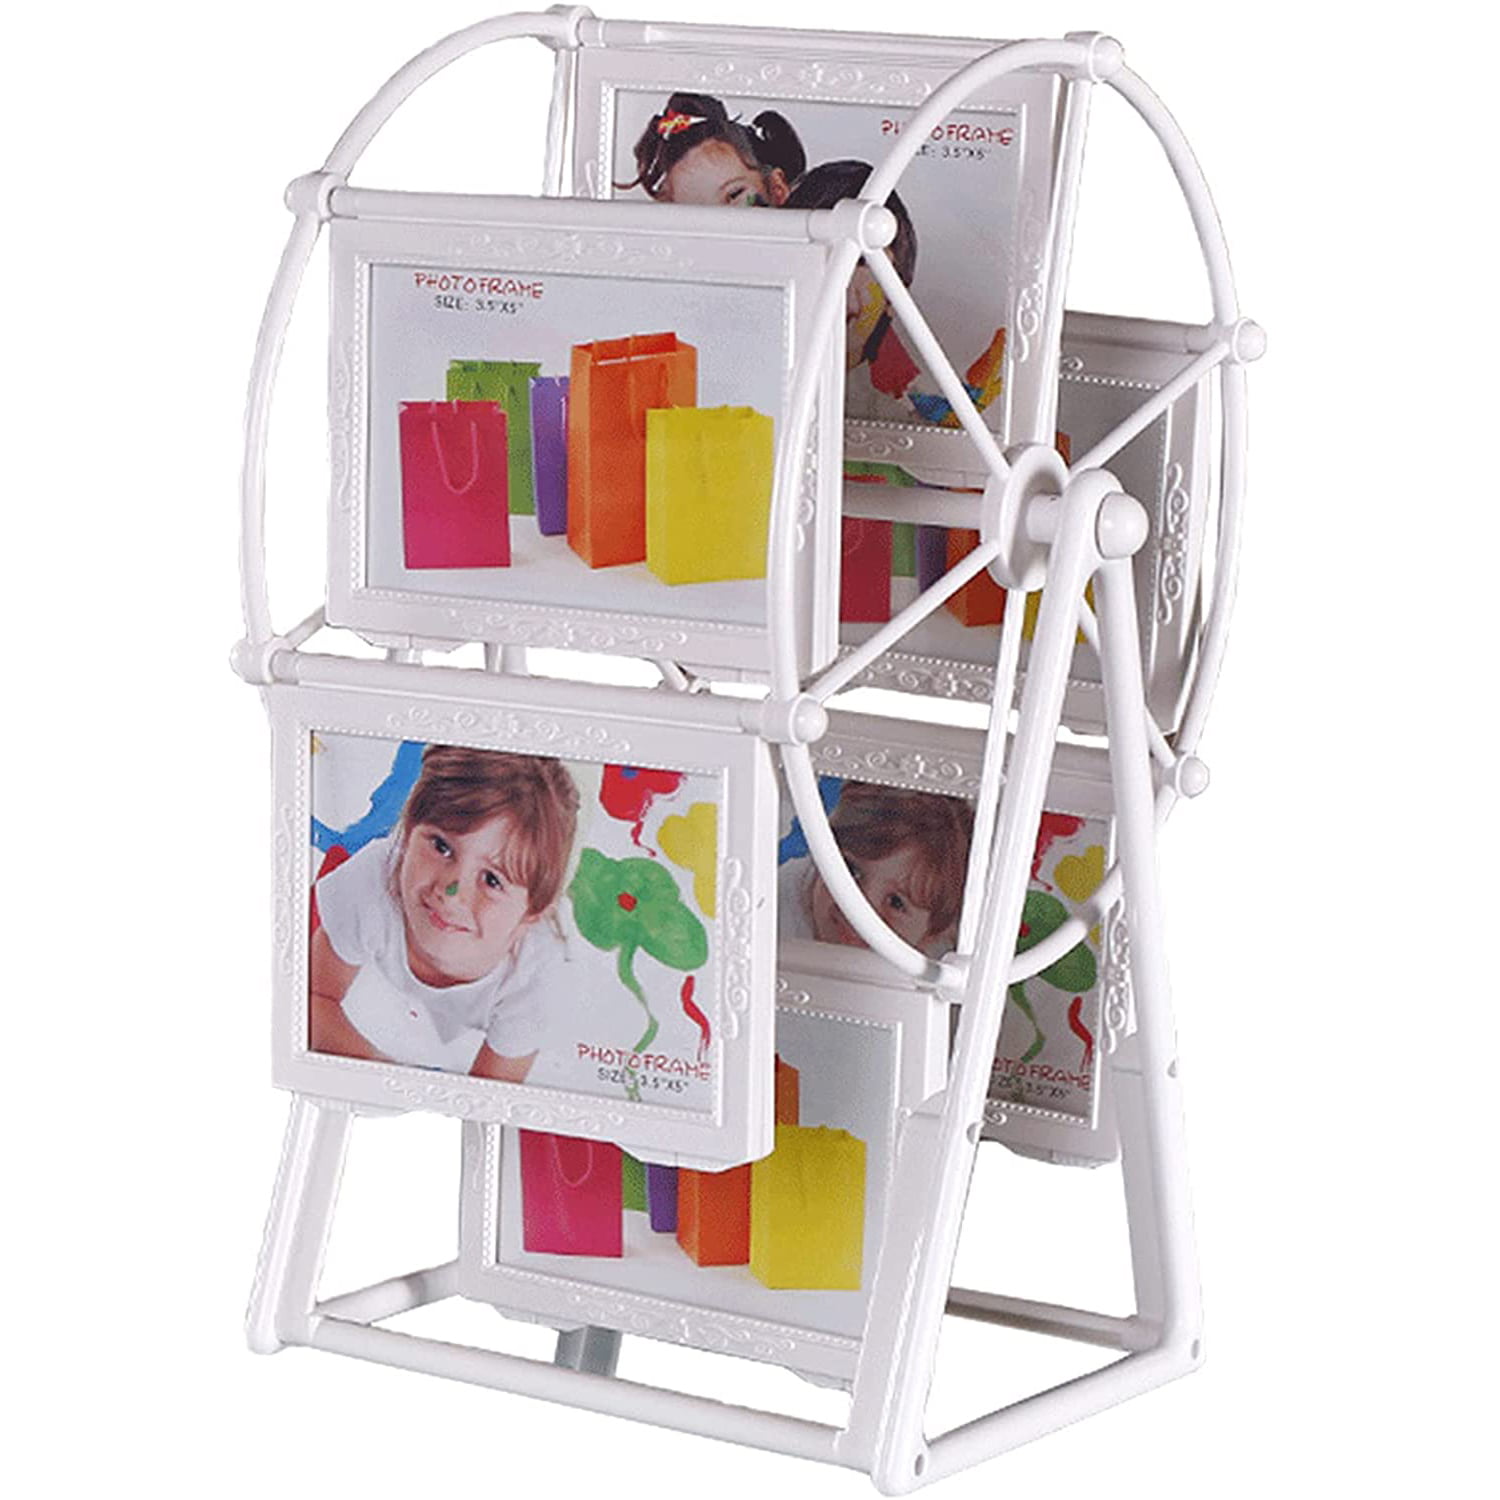 Personalized Family Photo Frame Shows for 12 Photos Home Décor Christmas Birthday Gifts Rotating Ferris Wheel Picture Frame Desk Table Top Vintage Photo Frames